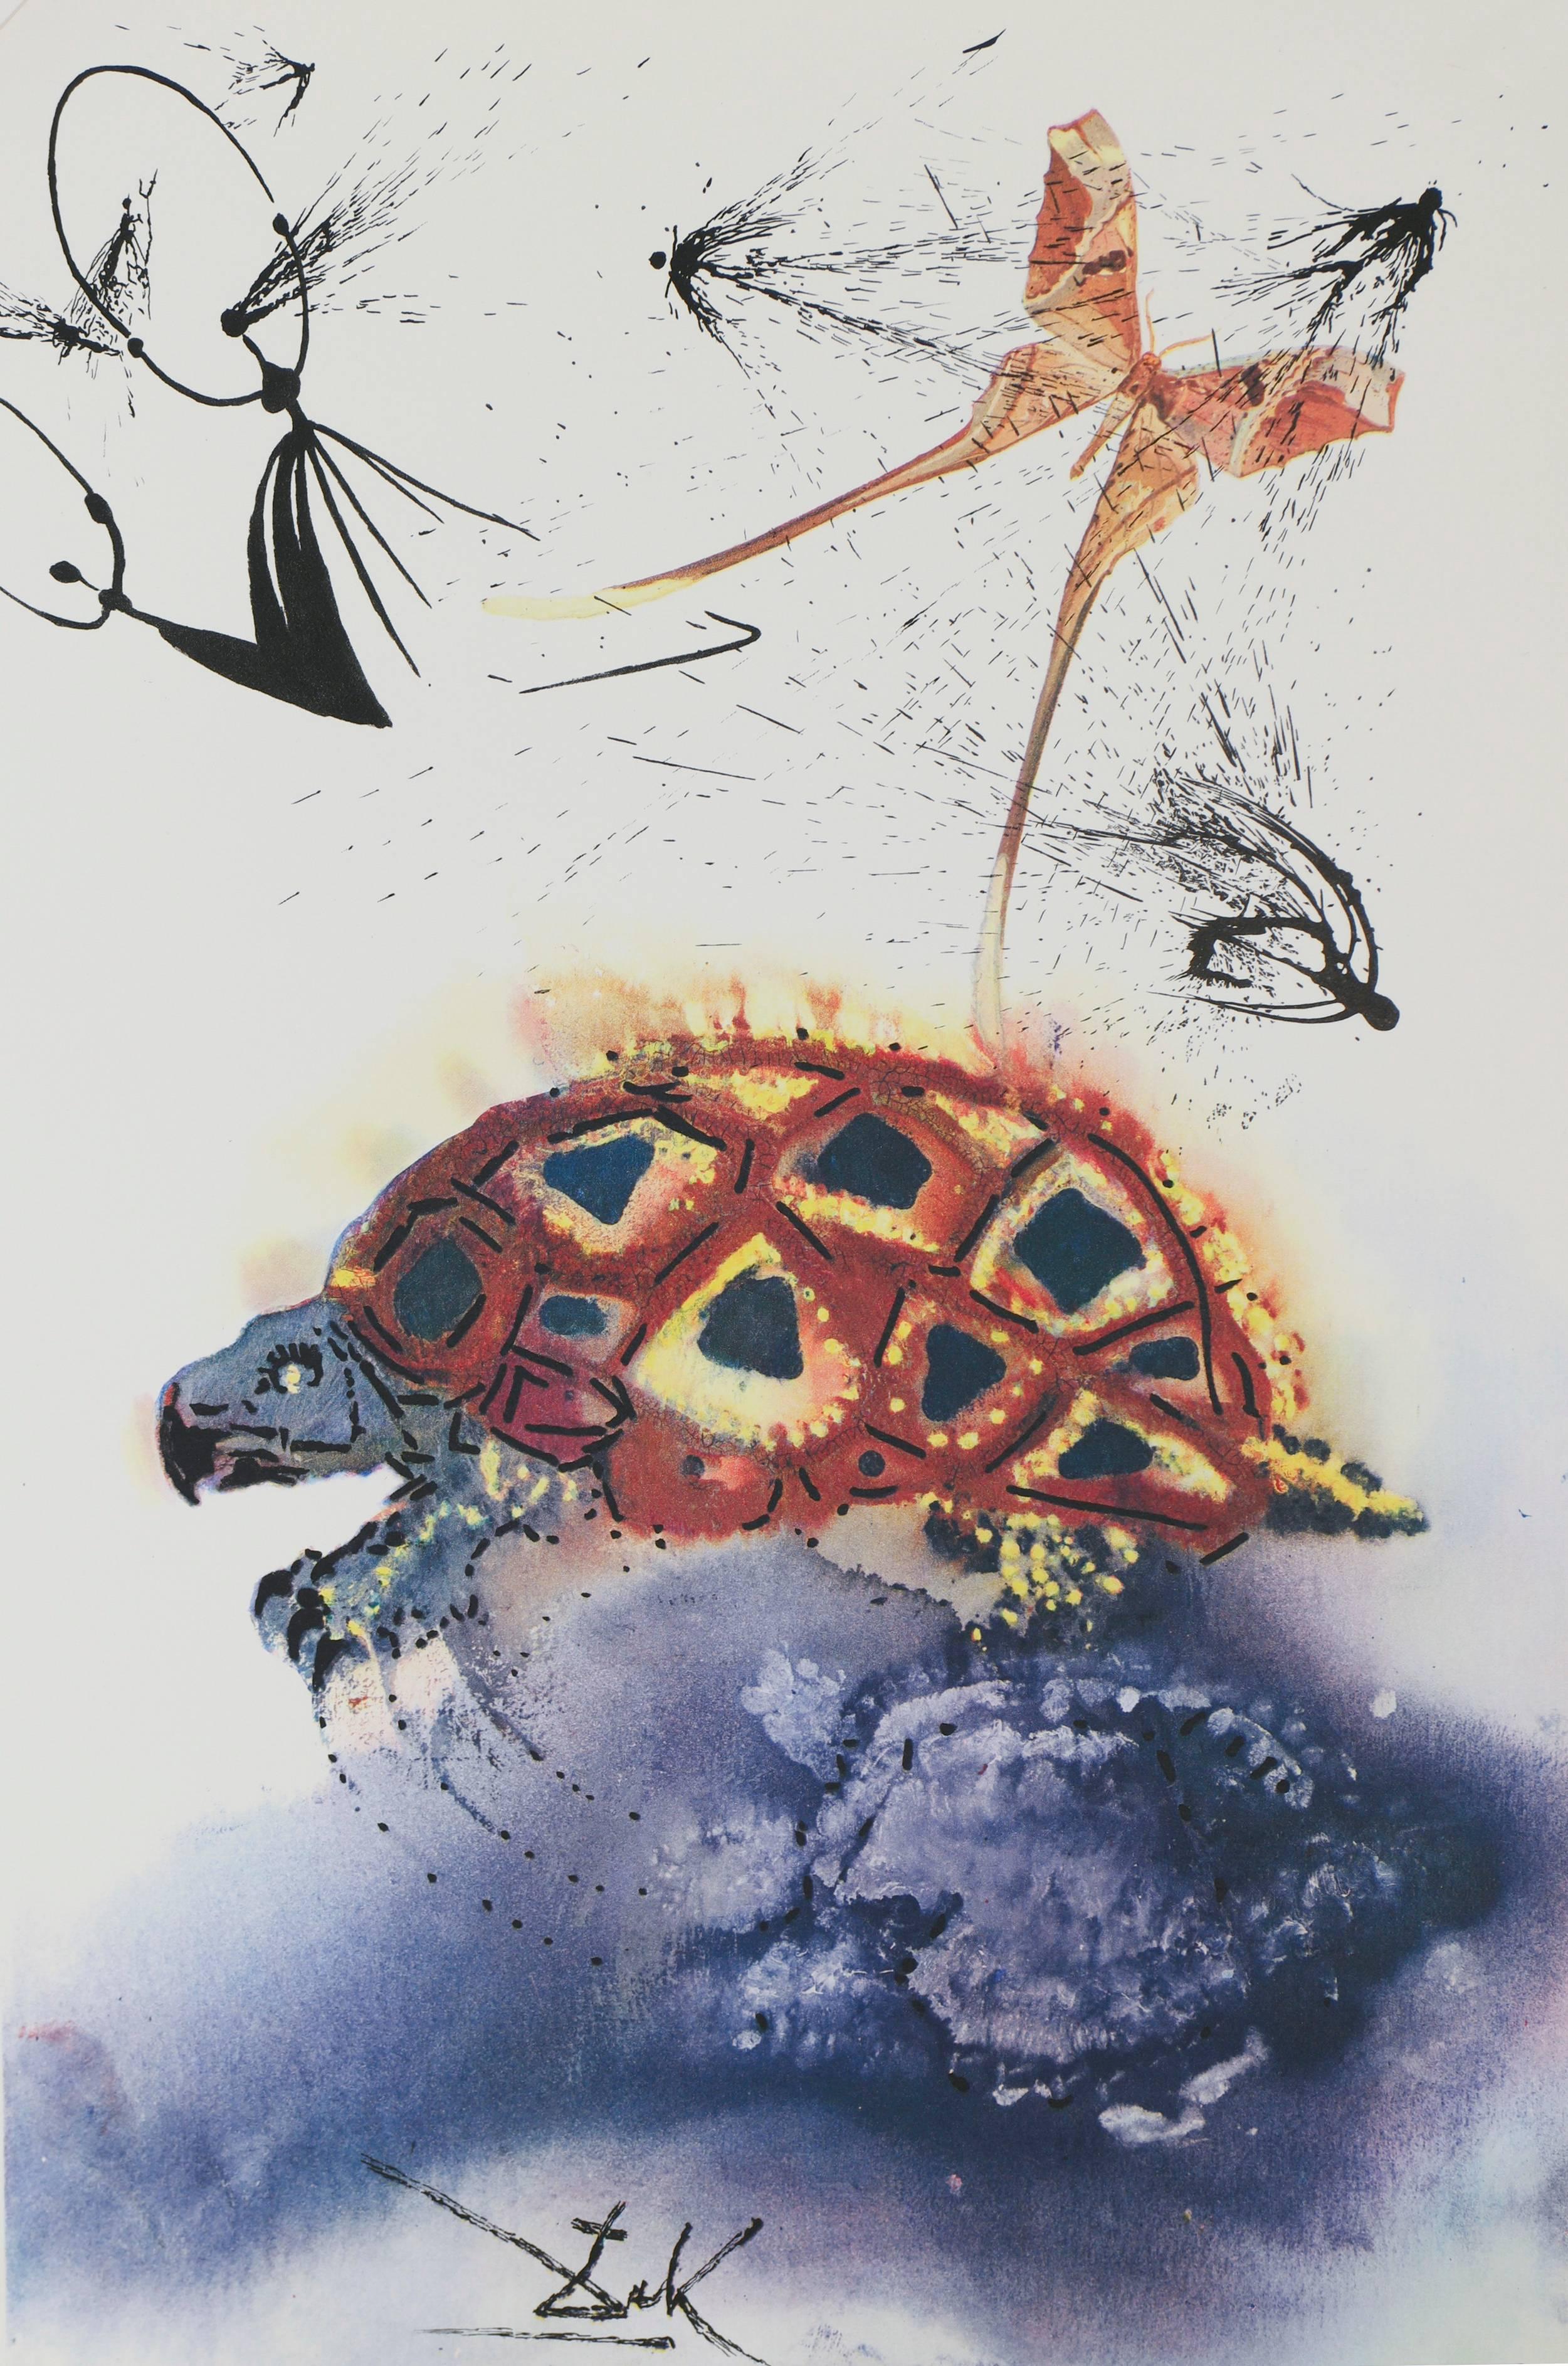 Salvador Dalí Abstract Print - The Mock Turtle's Story